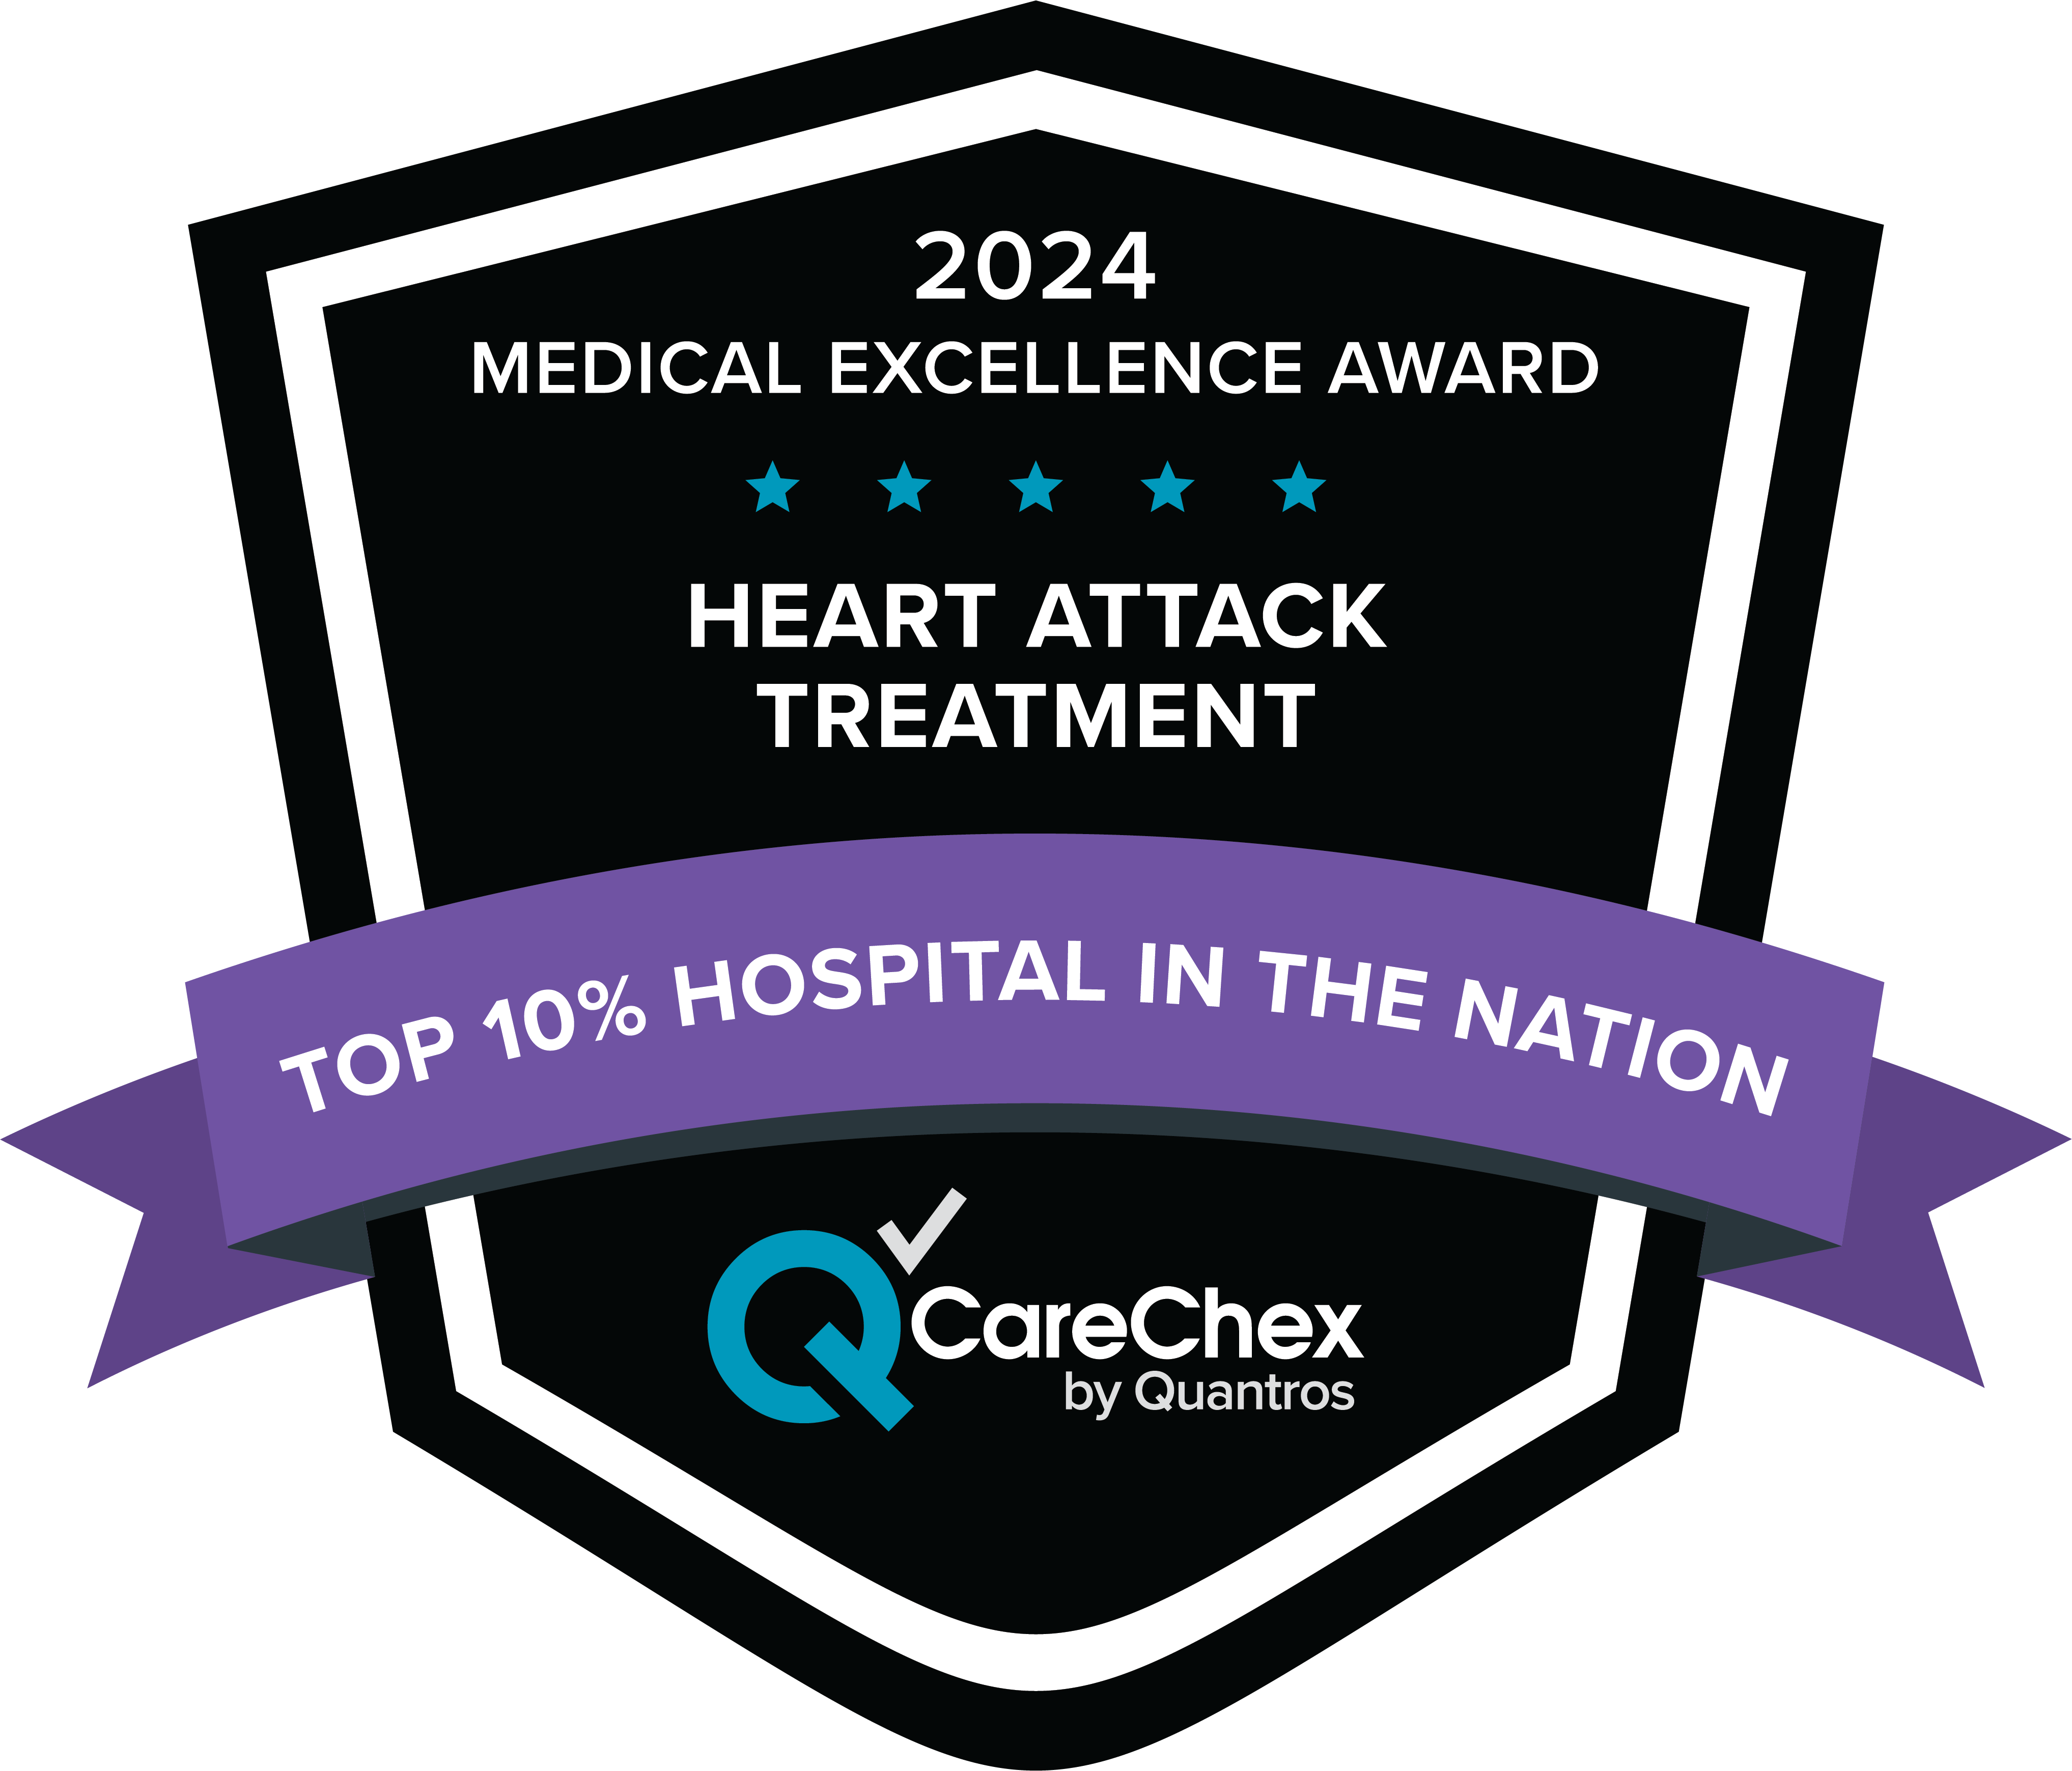 Awards badge for Top 10% Hospital in the Nation for Medical Excellence in Heart Attack Treatment – 2024 CareChex by Quantros